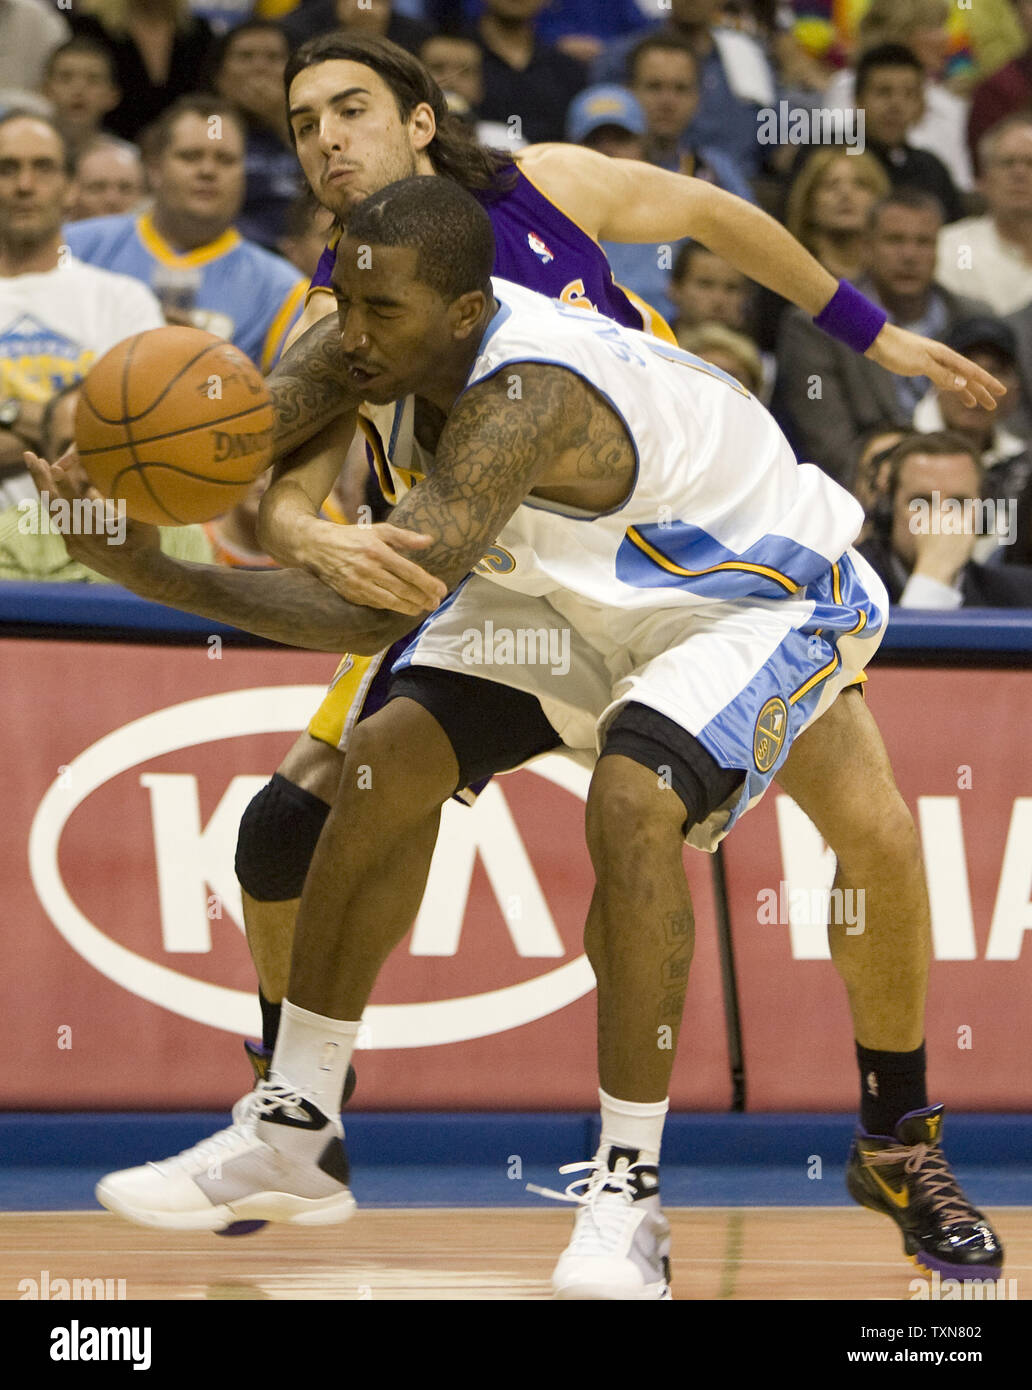 Los Angeles Lakers guard Sasha Vujacic (back) fouls Denver Nuggets guard J.R. Smith on an inbounds pass in the second half of game three of the Western Conference finals at the Pepsi Center in Denver on May 23, 2009.  .Los Angeles beat Denver 103-97 to take a 2-1 series lead.  (UPI Photo/Gary C. Caskey) Stock Photo